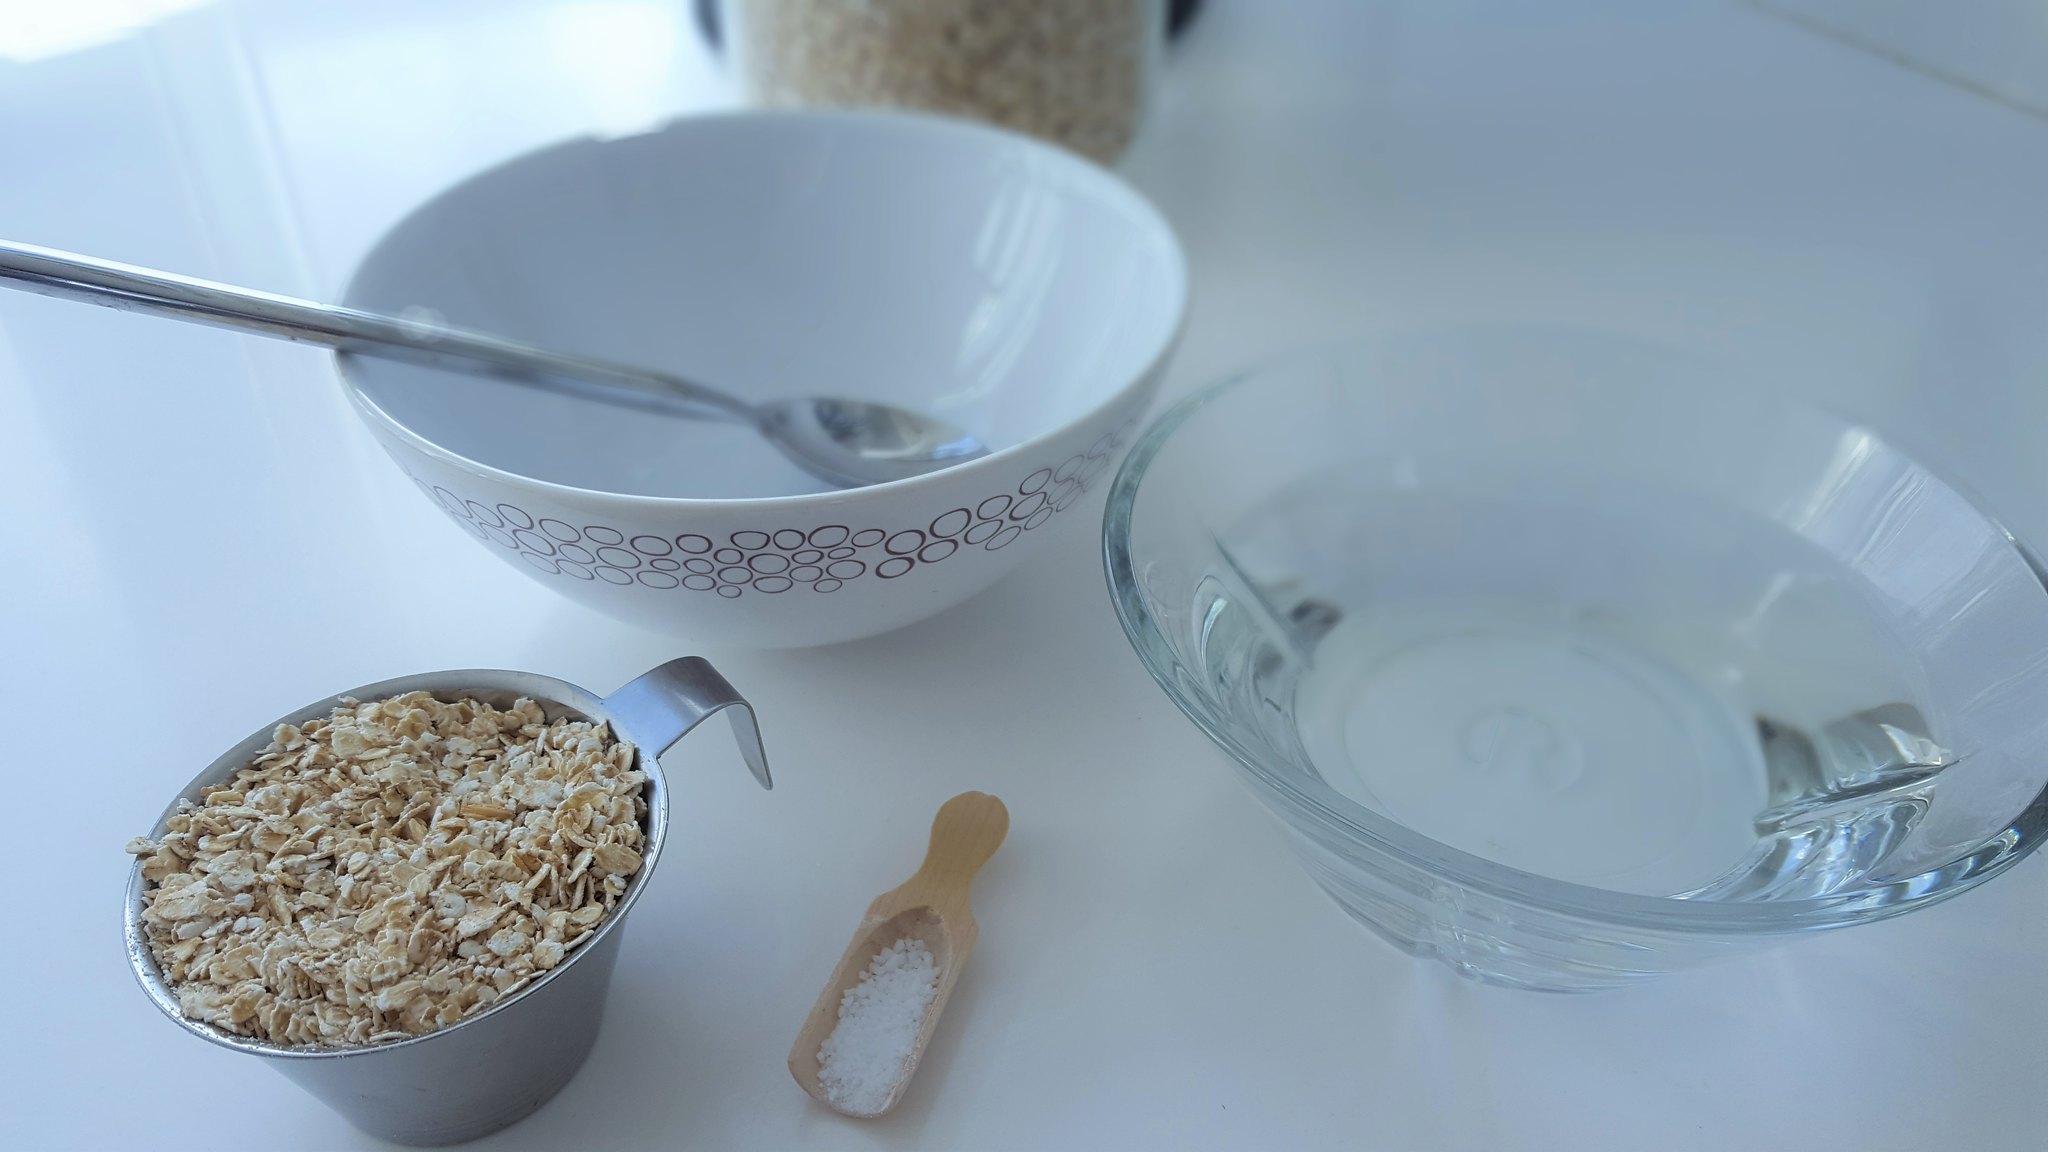 Recipe for Homemade Oatmeal in Microwave oven